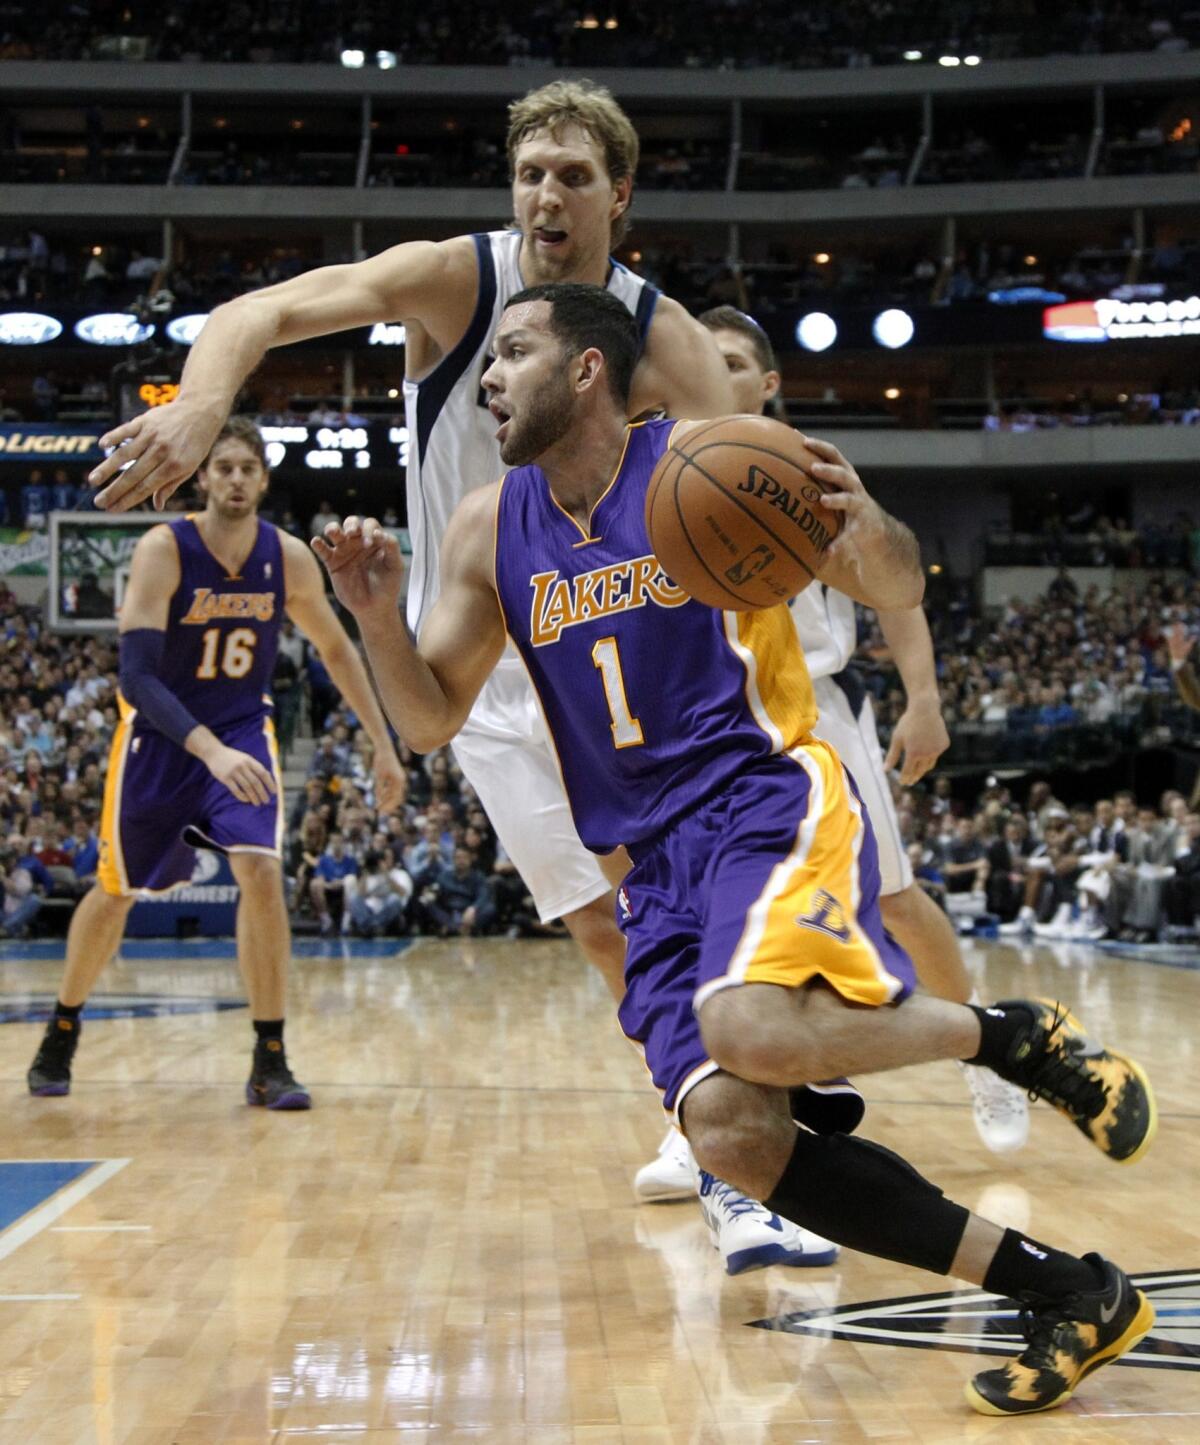 Lakers guard Jordan Farmar, front, tries to drive past Dallas Mavericks center Dirk Nowitzki during the first half of Tuesday's game.